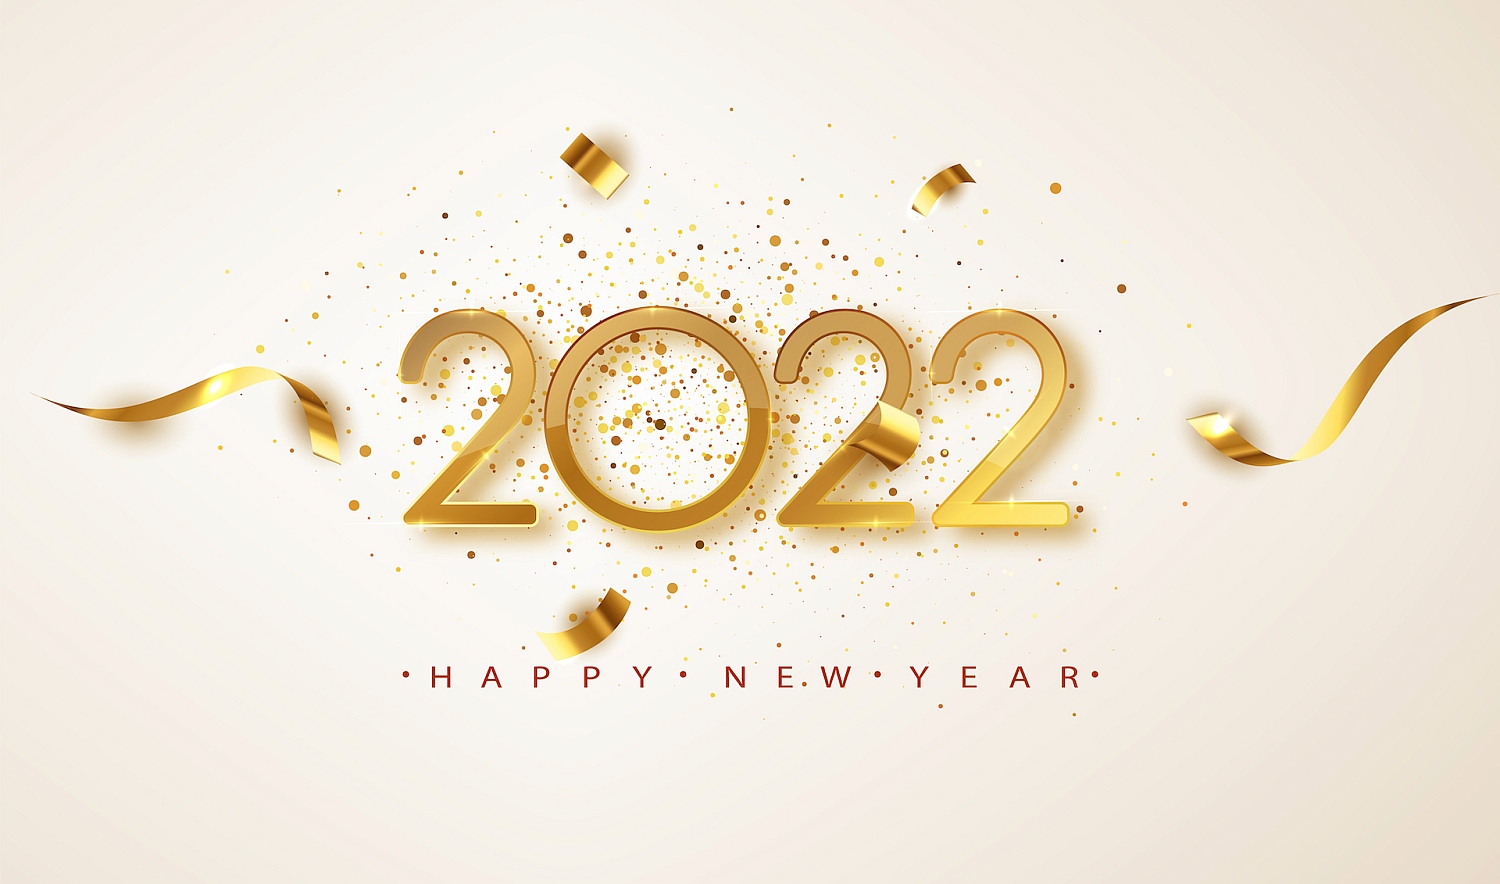 Heres to 2022! 2022, background, banner, calendar, card, celebrate, celebration, confetti, congratulation, decoration, element, festive, frame, glitter, gold, greeting, happy new year, holiday, illustration, international, letter, number, party, realistic, ribbon, seaso